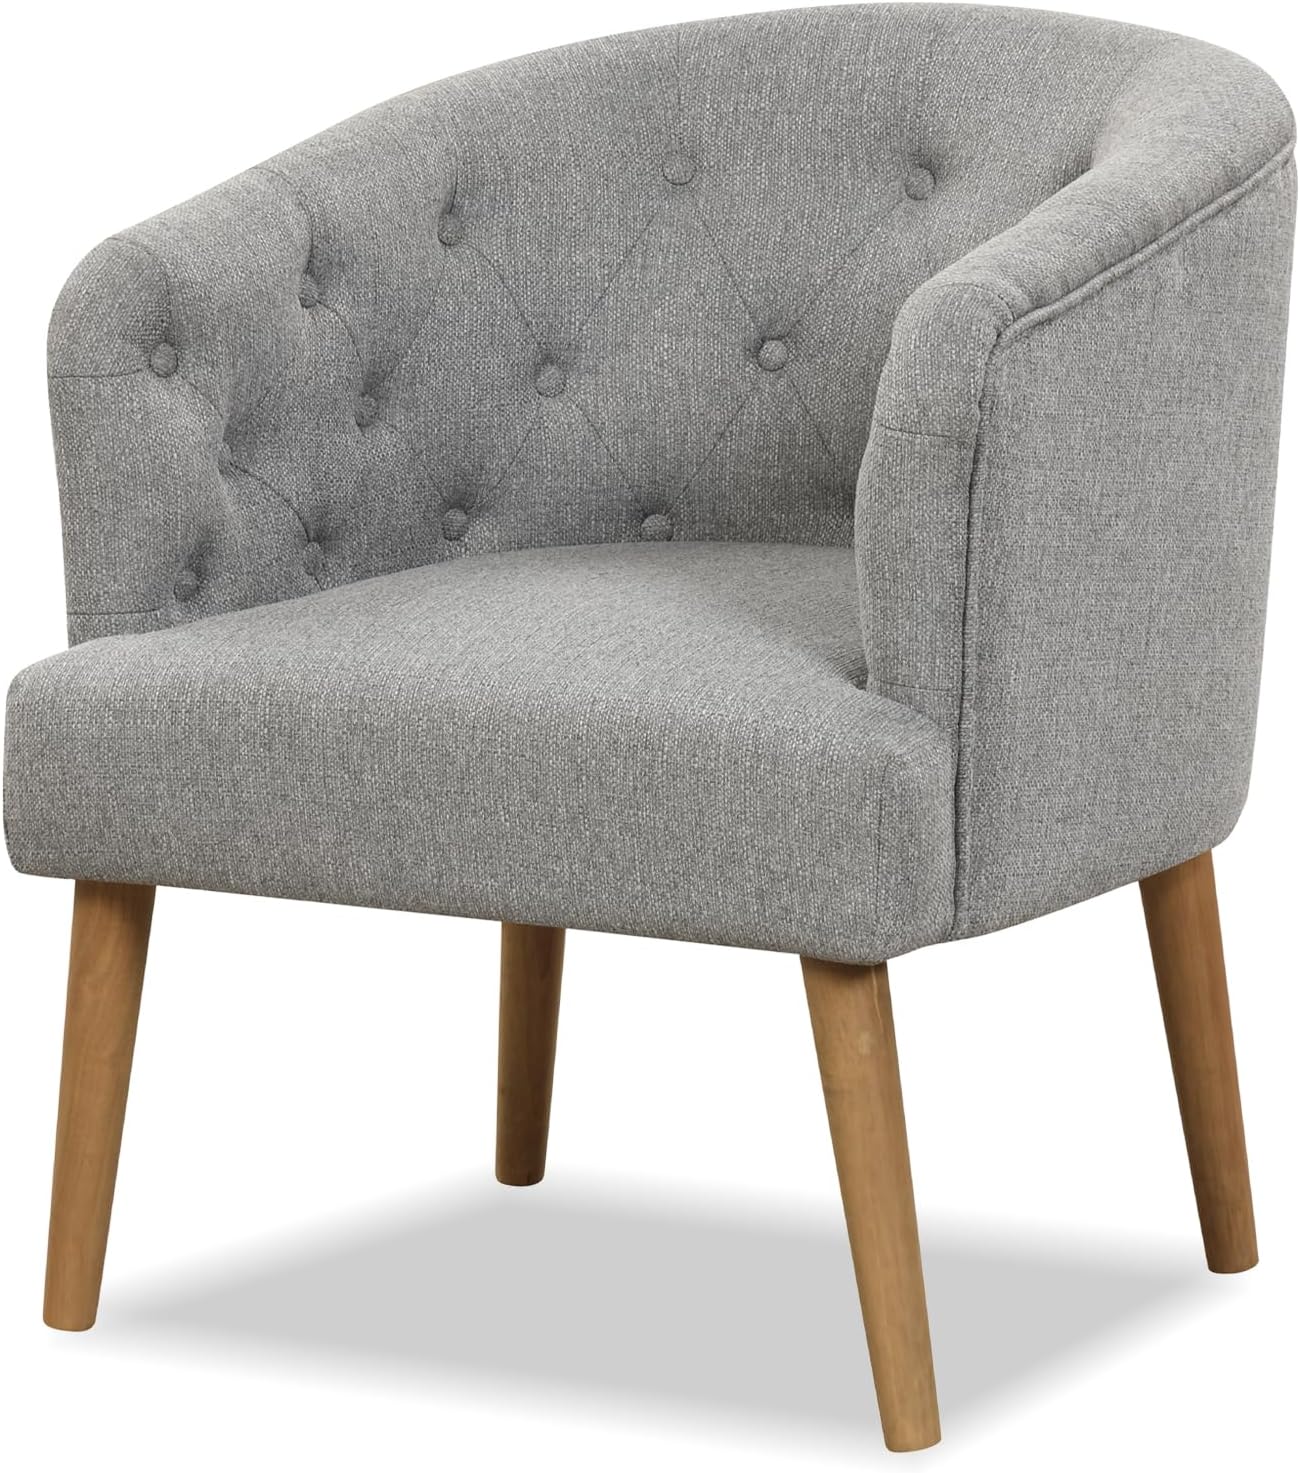 Giantex Tufted Accent Chair Set of 2 Grey, Upholstered Accent Armchair with Rubber Wood Legs